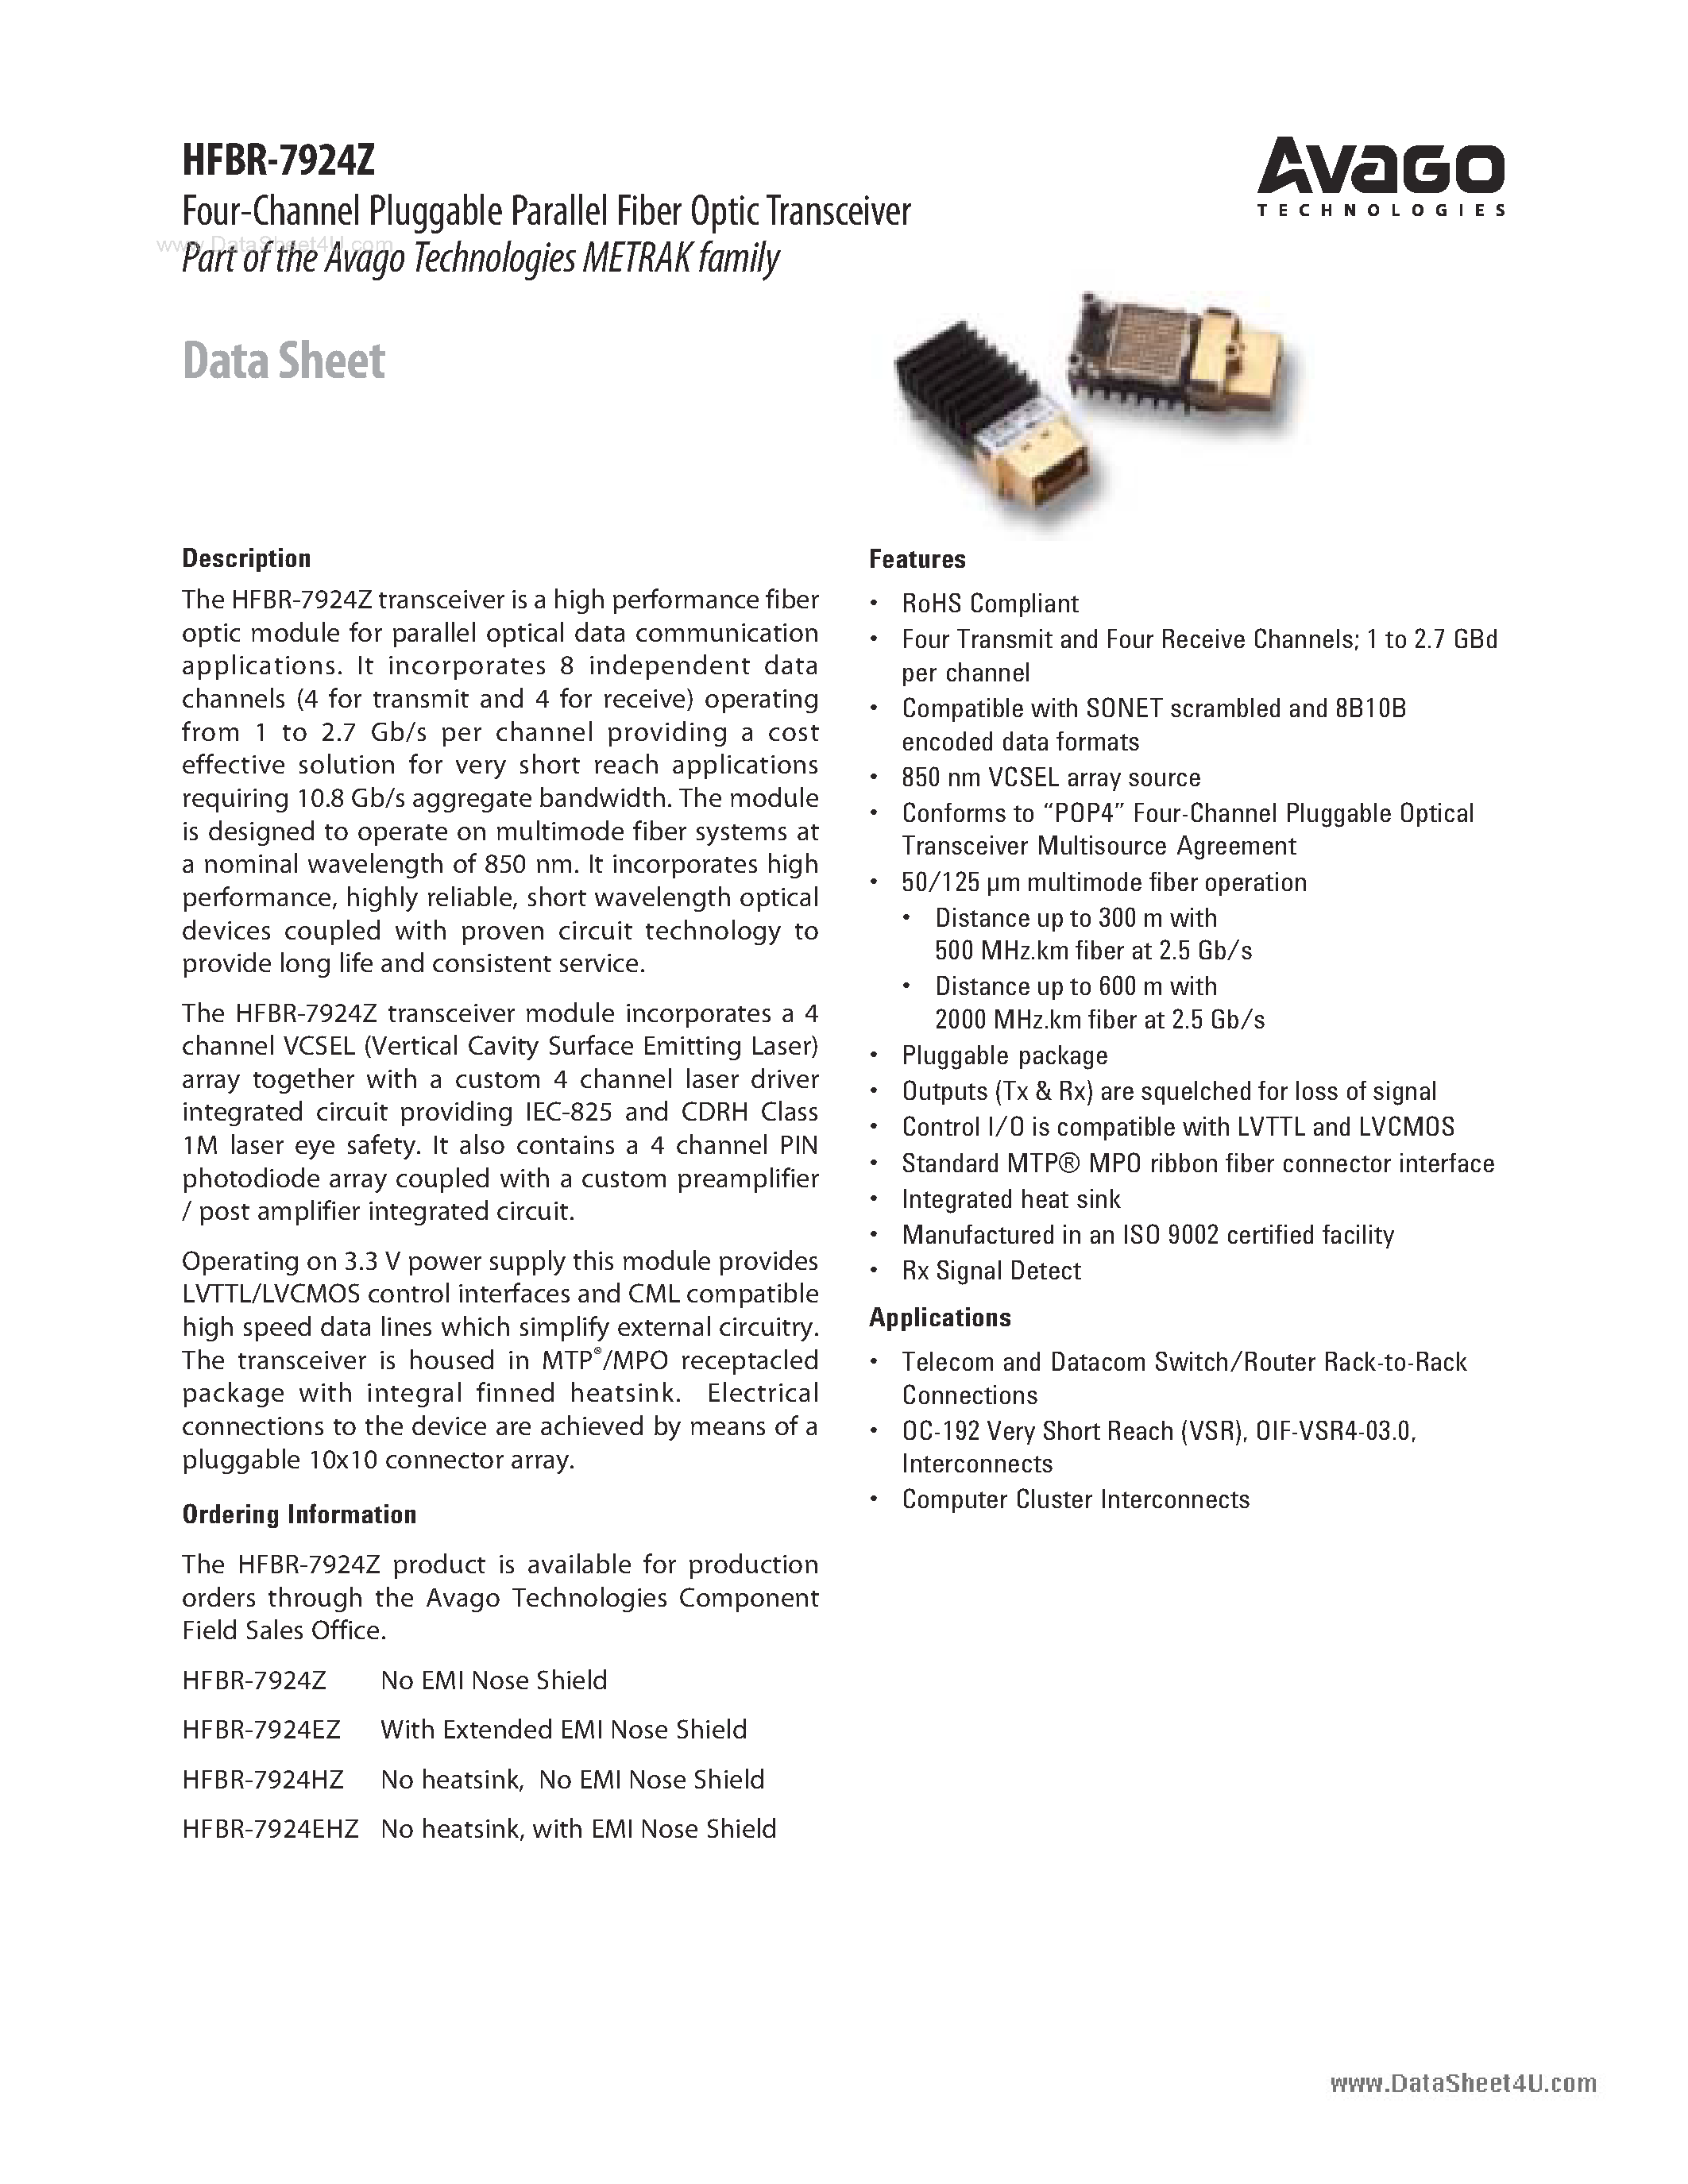 Datasheet HFBR-7924Z - Four-Channel Pluggable Parallel Fiber Optic Transceiver Part of the Avago Technologies METRAK family page 1